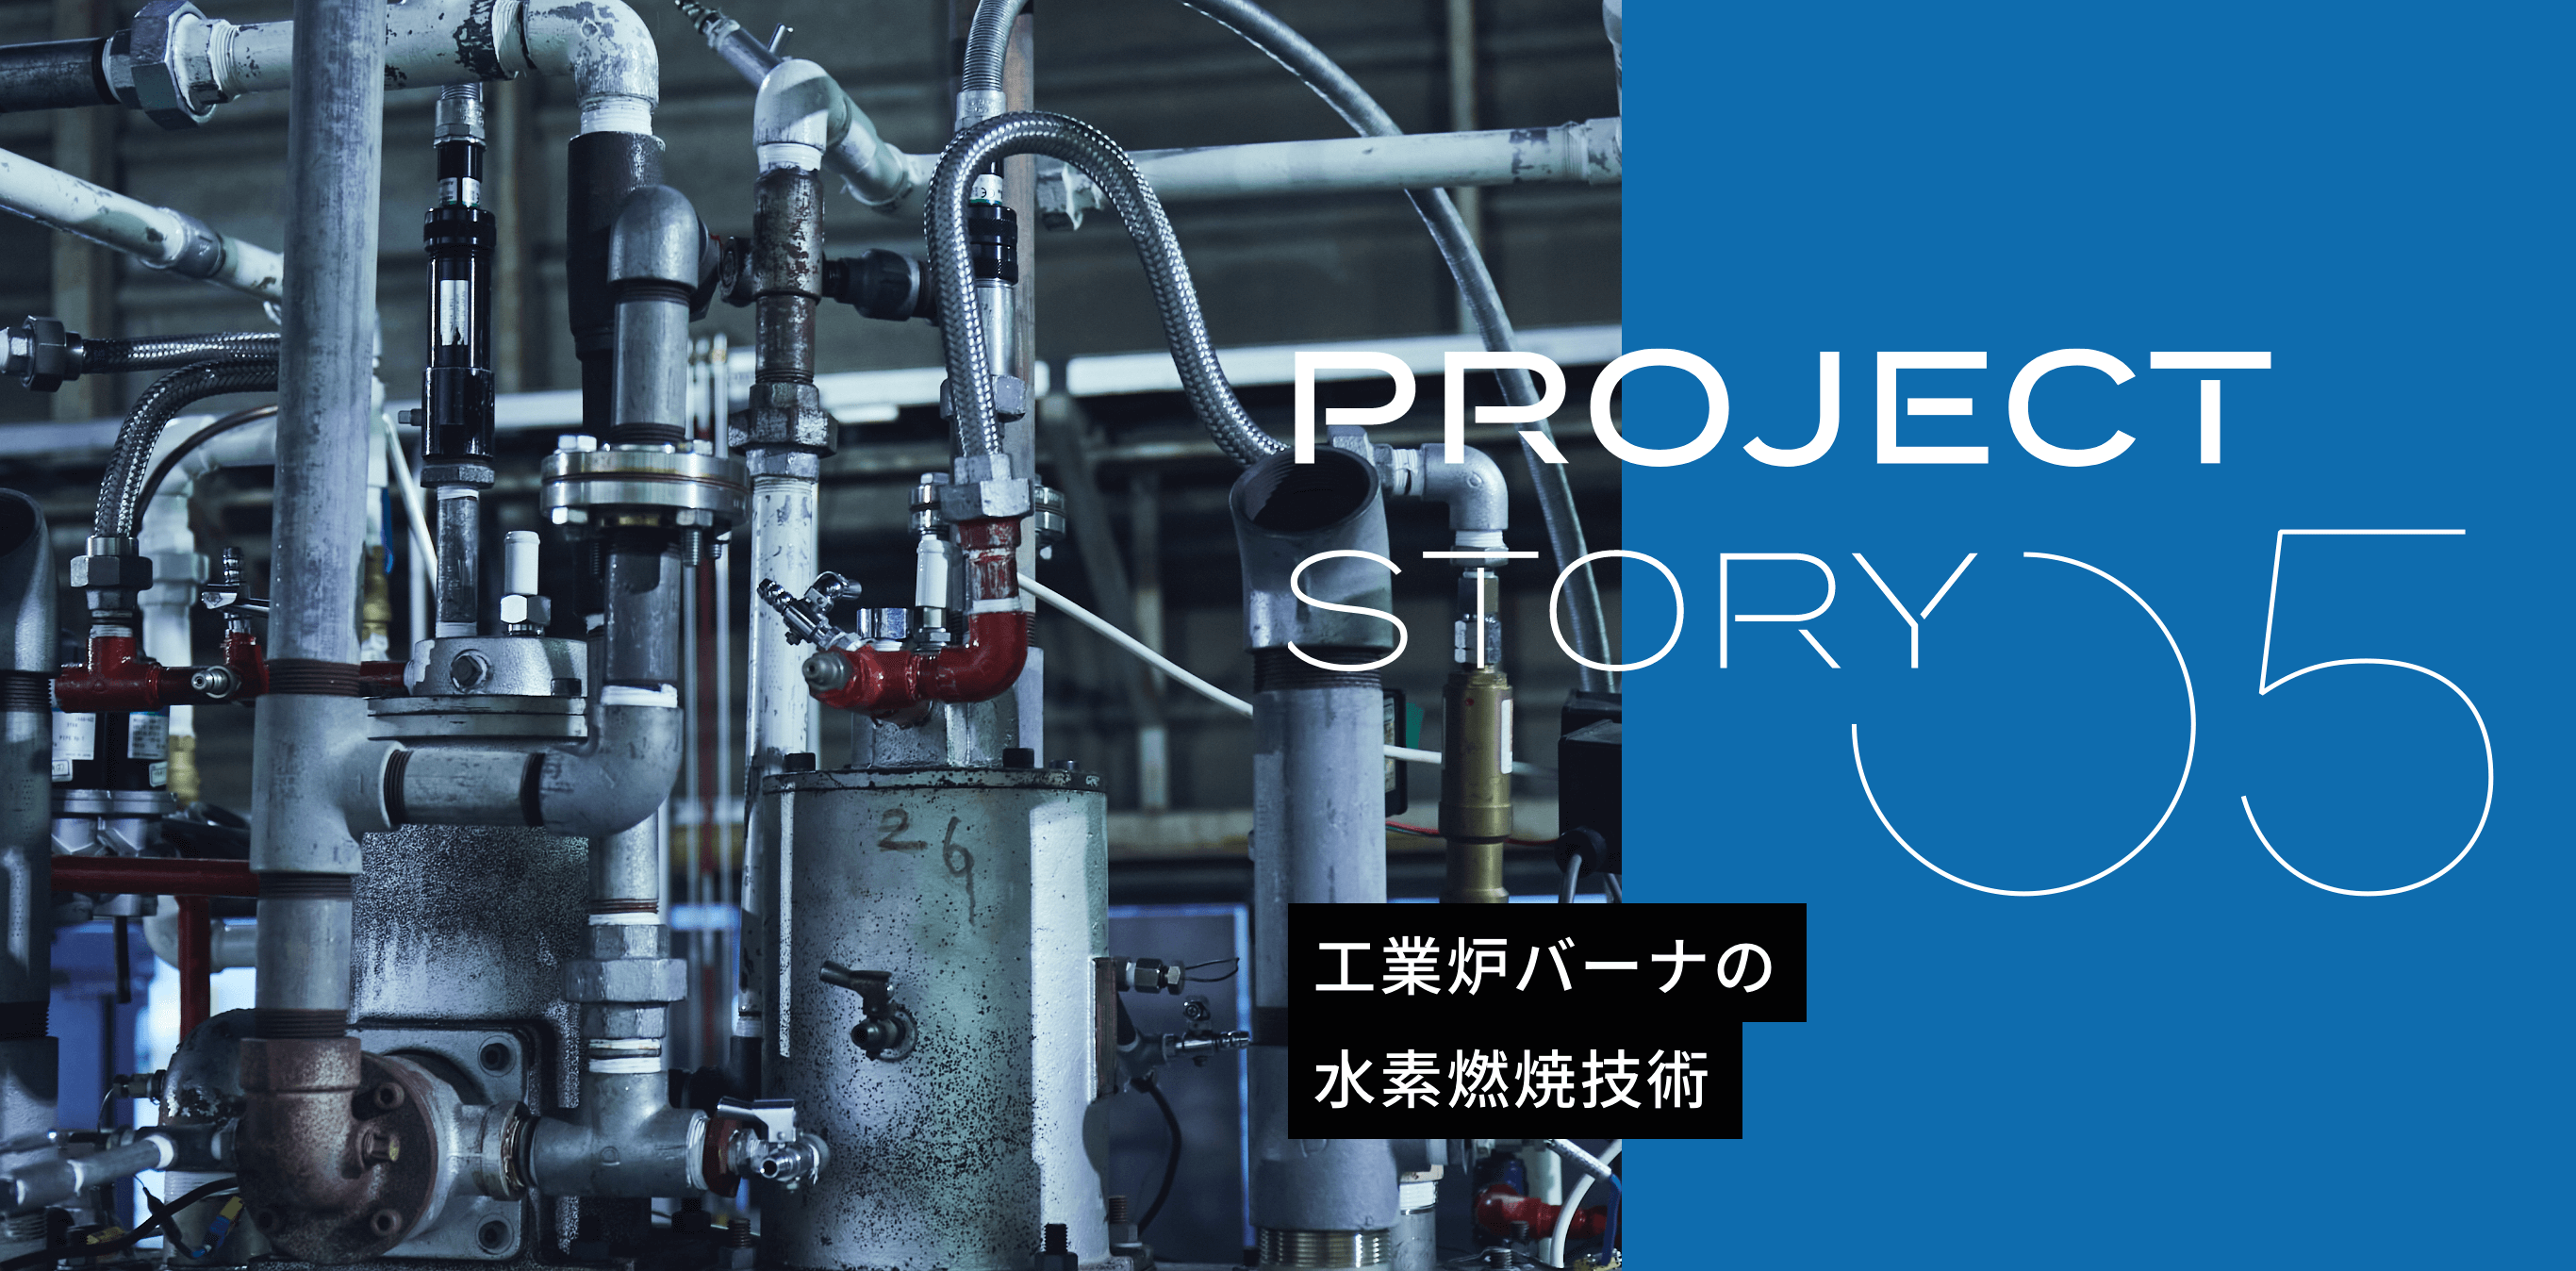 PROJECT STORY 05